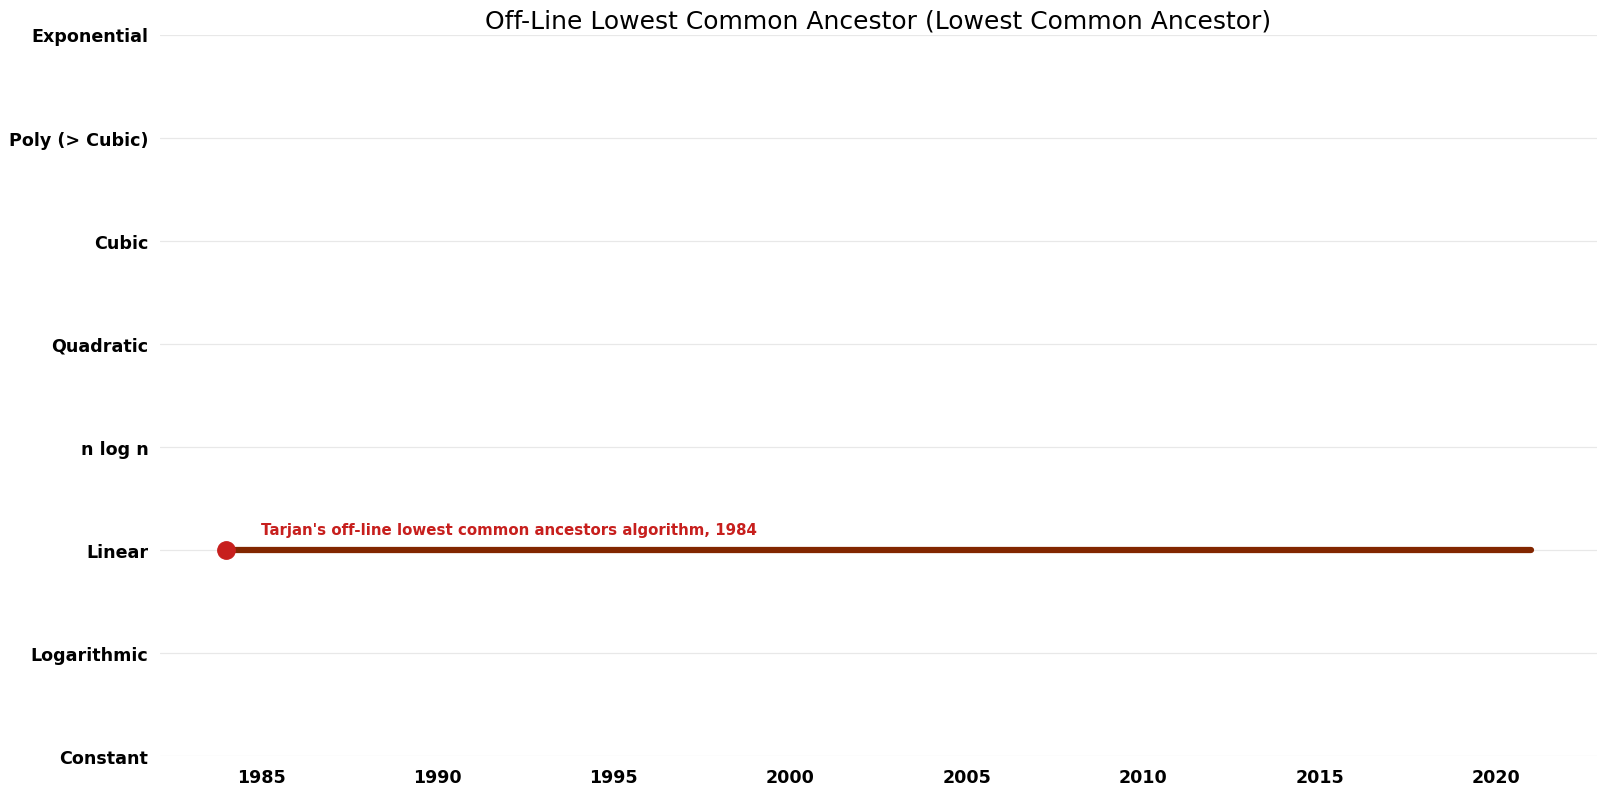 File:Lowest Common Ancestor - Off-Line Lowest Common Ancestor - Space.png